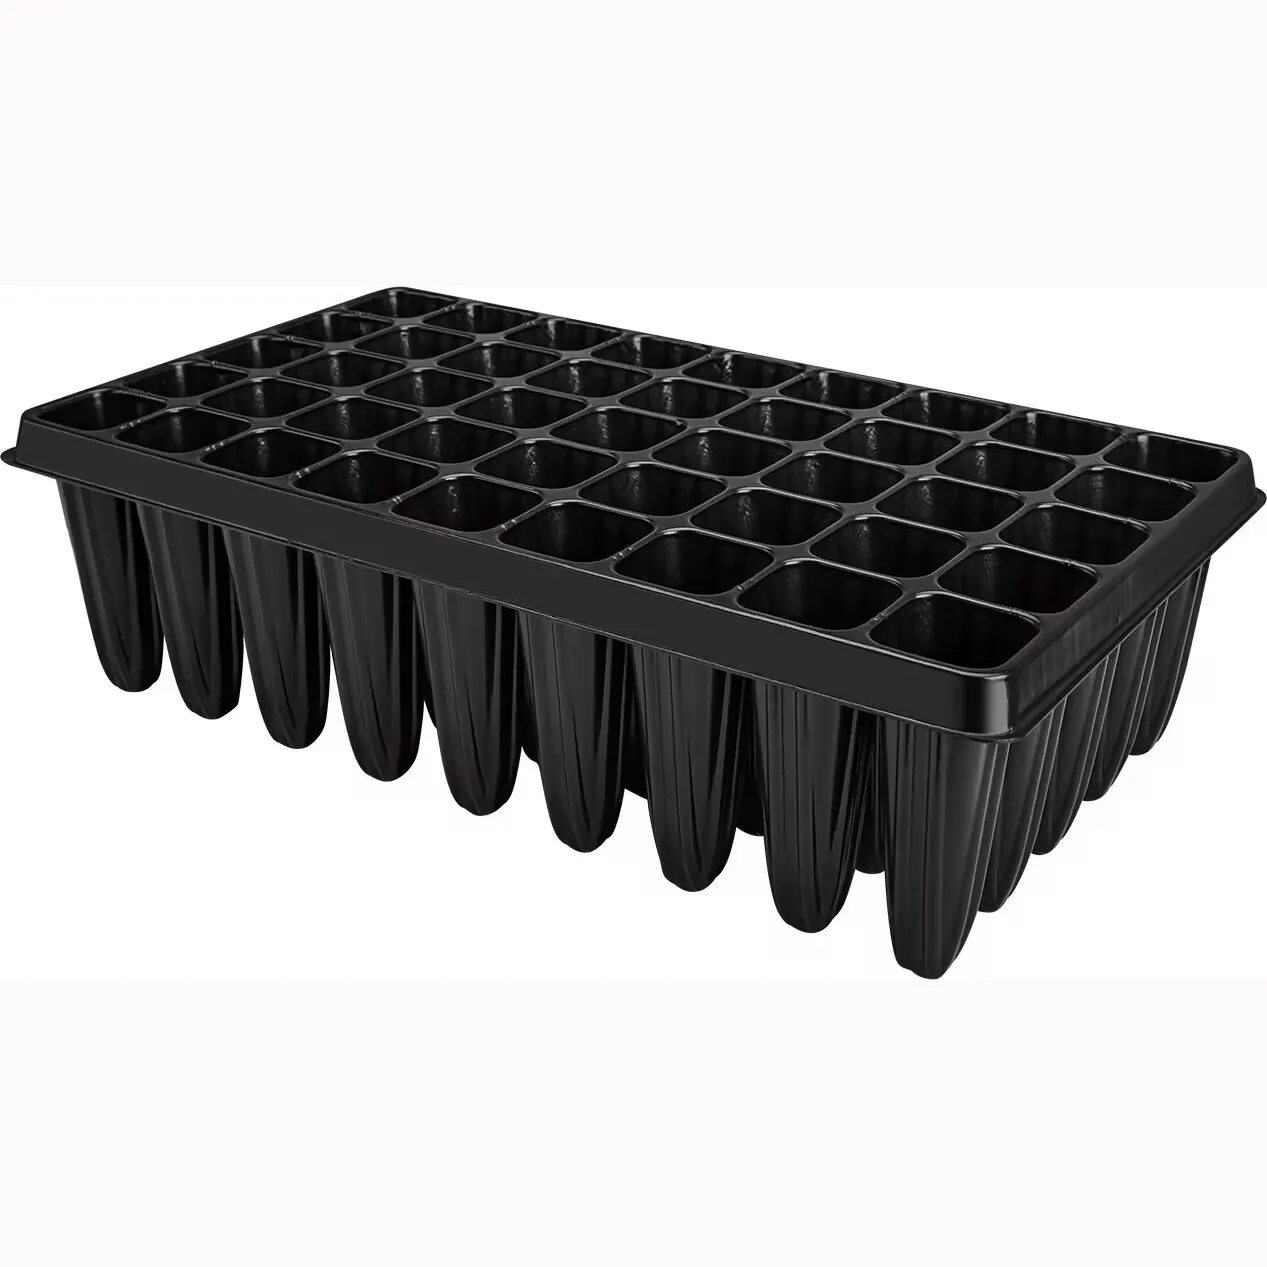 14cm 5.5inch deep 45 holes plastic seed cells tray for young tree fast growth plantlet